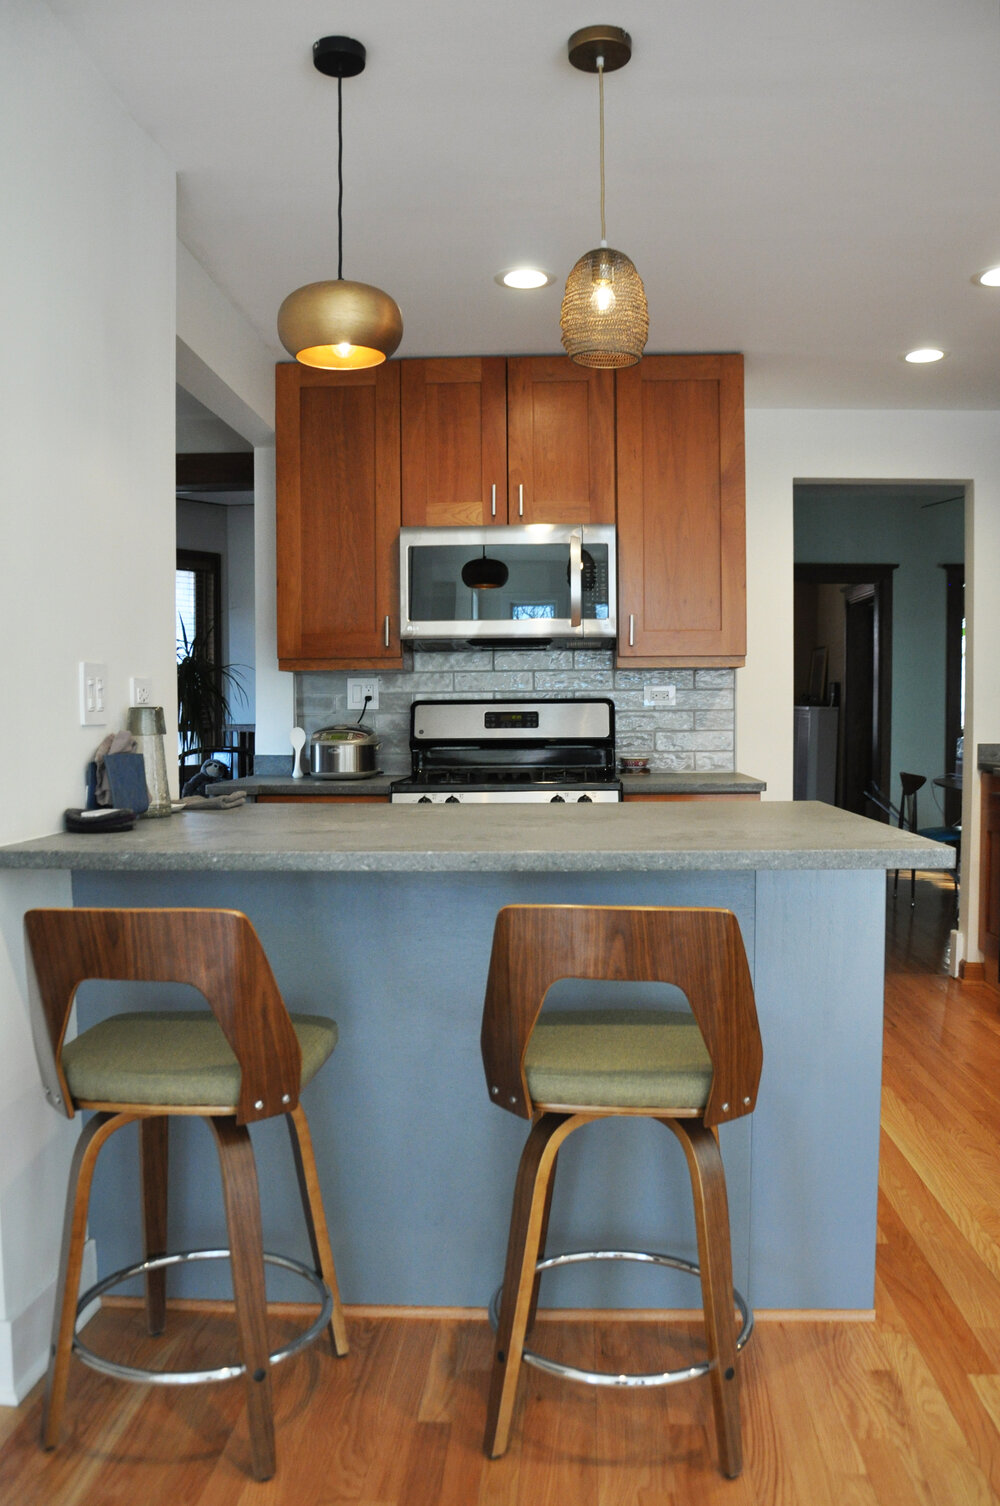 Renovated kitchen with counter seating